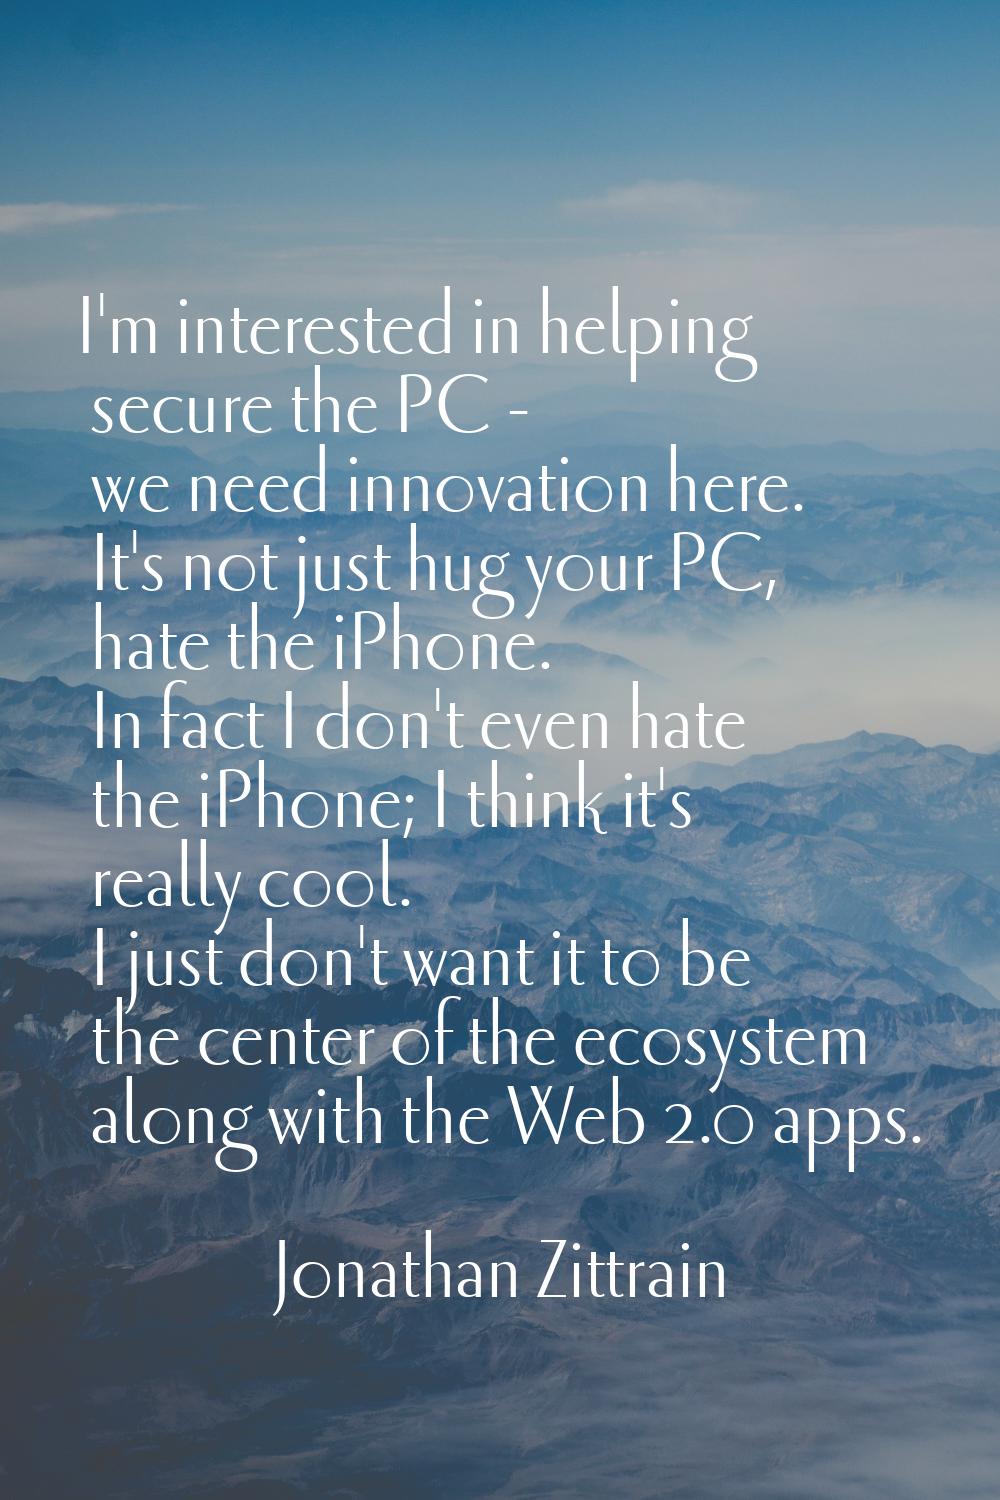 I'm interested in helping secure the PC - we need innovation here. It's not just hug your PC, hate 